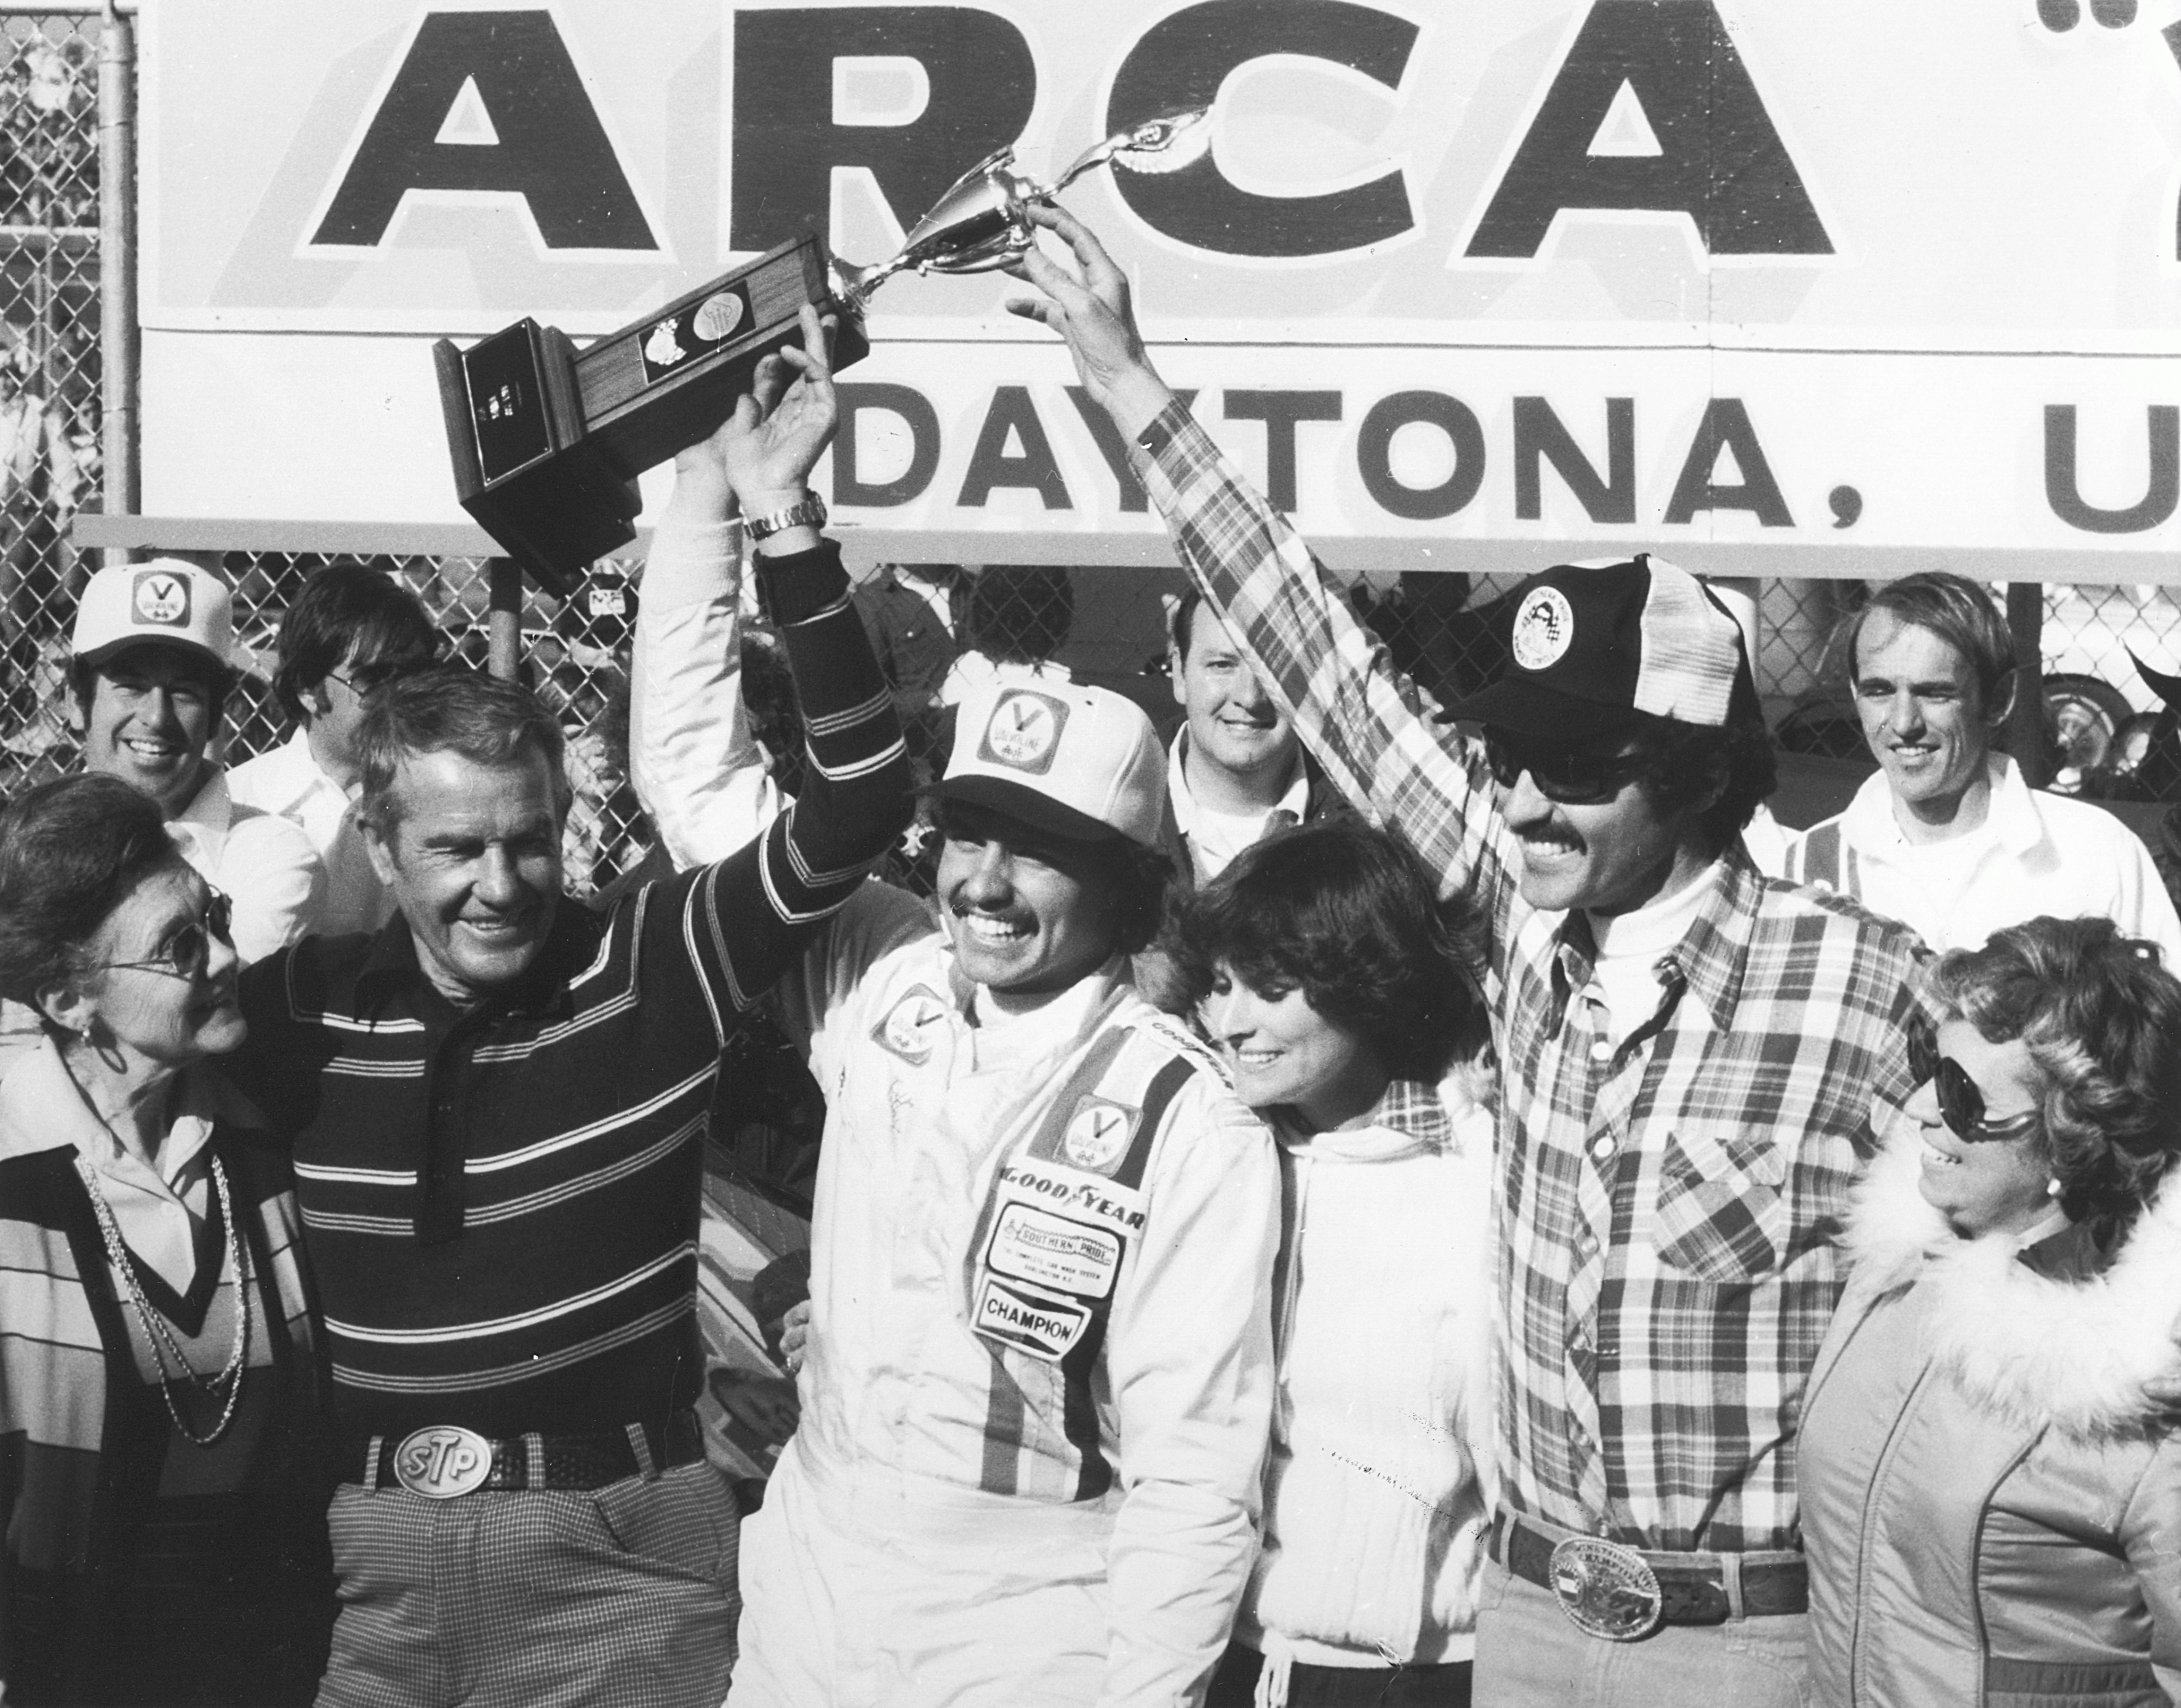 DAYTONA BEACH, FL - FEBRUARY 11, 1979: Kyle Petty in victory lane with his wife after winning the ARCA race at Daytona, his first-ever win. To Kyle